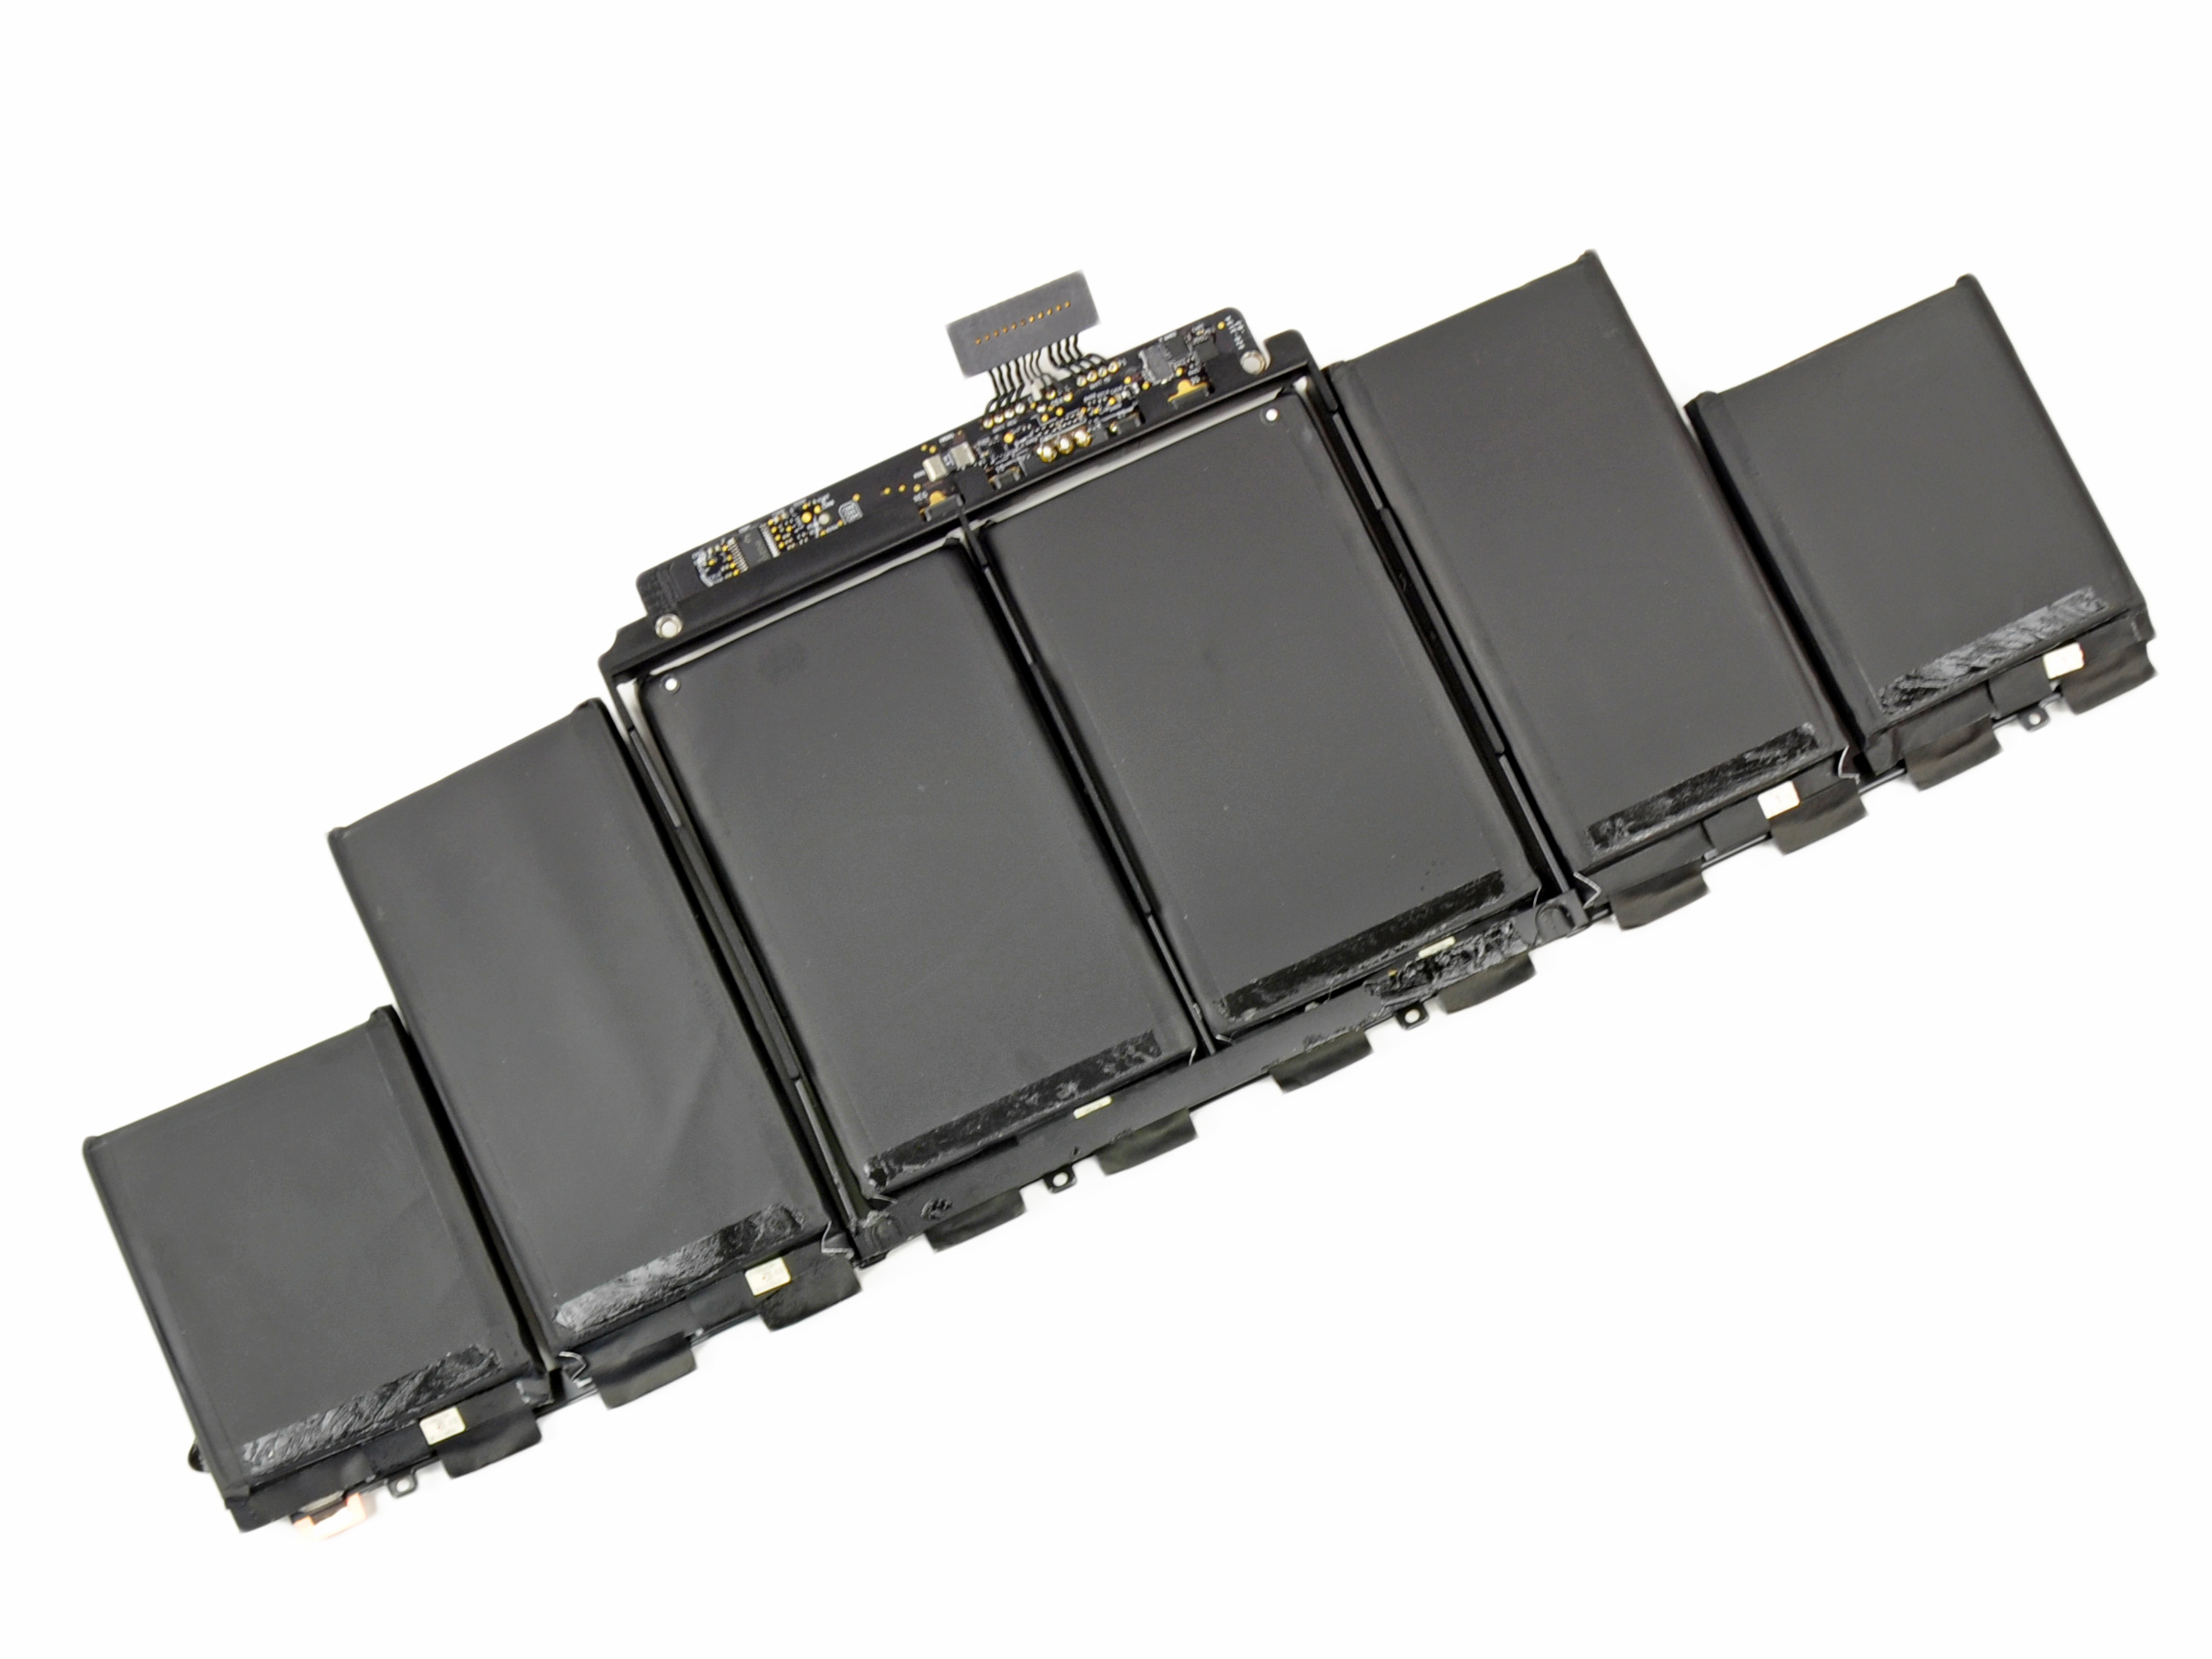 ... battery used in the Retina MacBook Pro, which Apple says techs shouldn